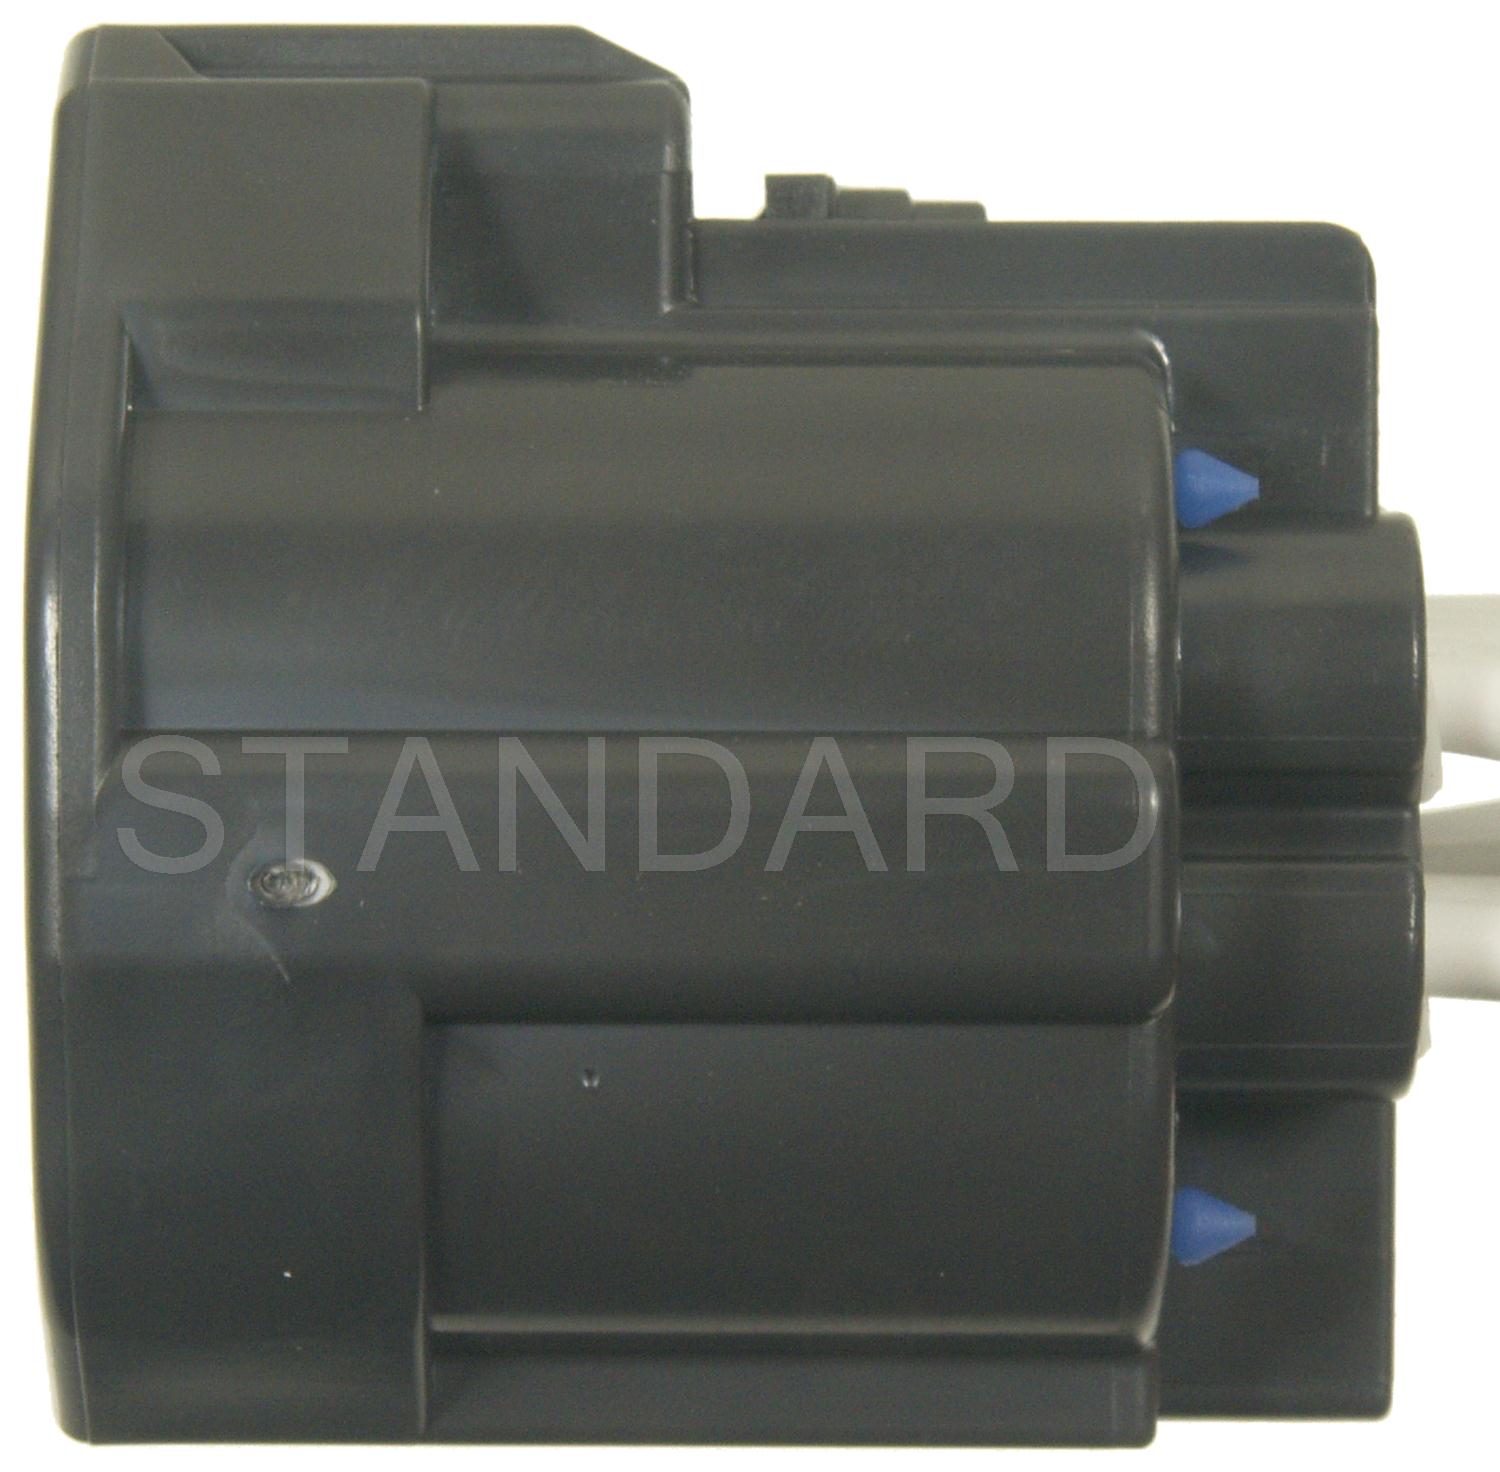 Picture of Standard Motor Products S1520 Standard Pigtails & Socke